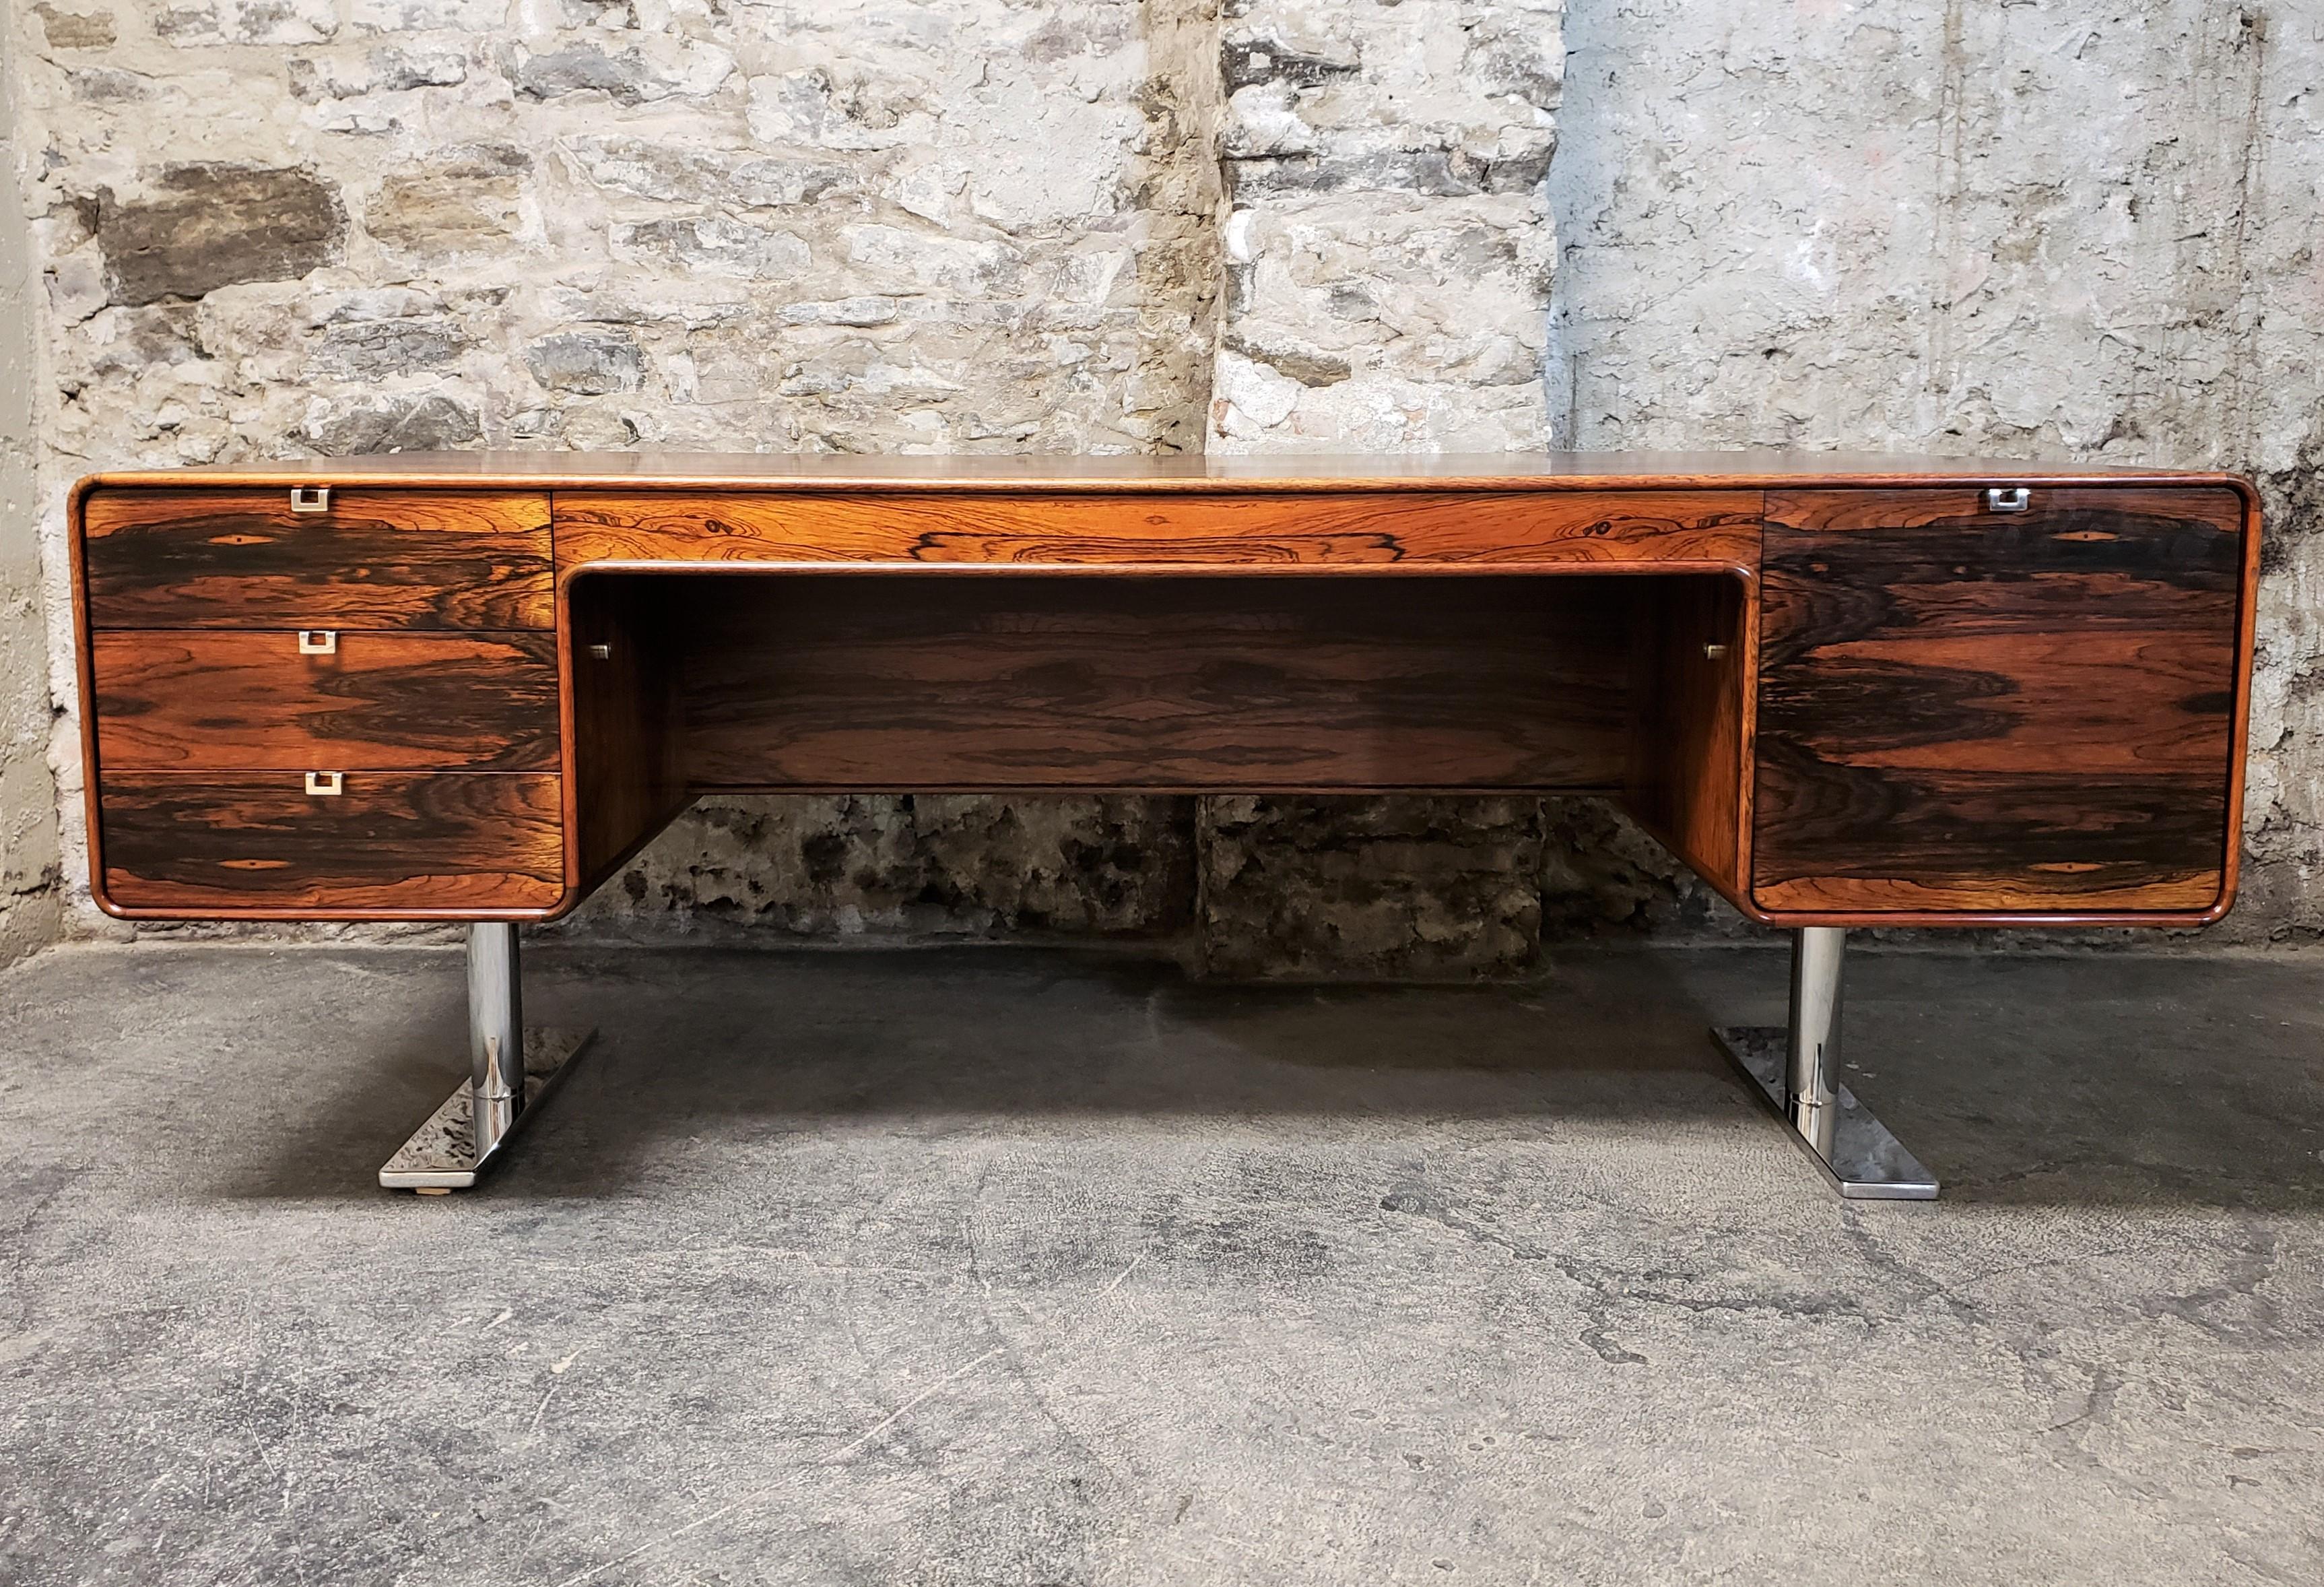 Rare Mid-Century Modern Leif Jacobsen executive desk, circa 1970. This high quality constructed desk features beautiful exotic rosewood grain, a finished back, spacious drawers, chrome hardware and cantilevered legs.